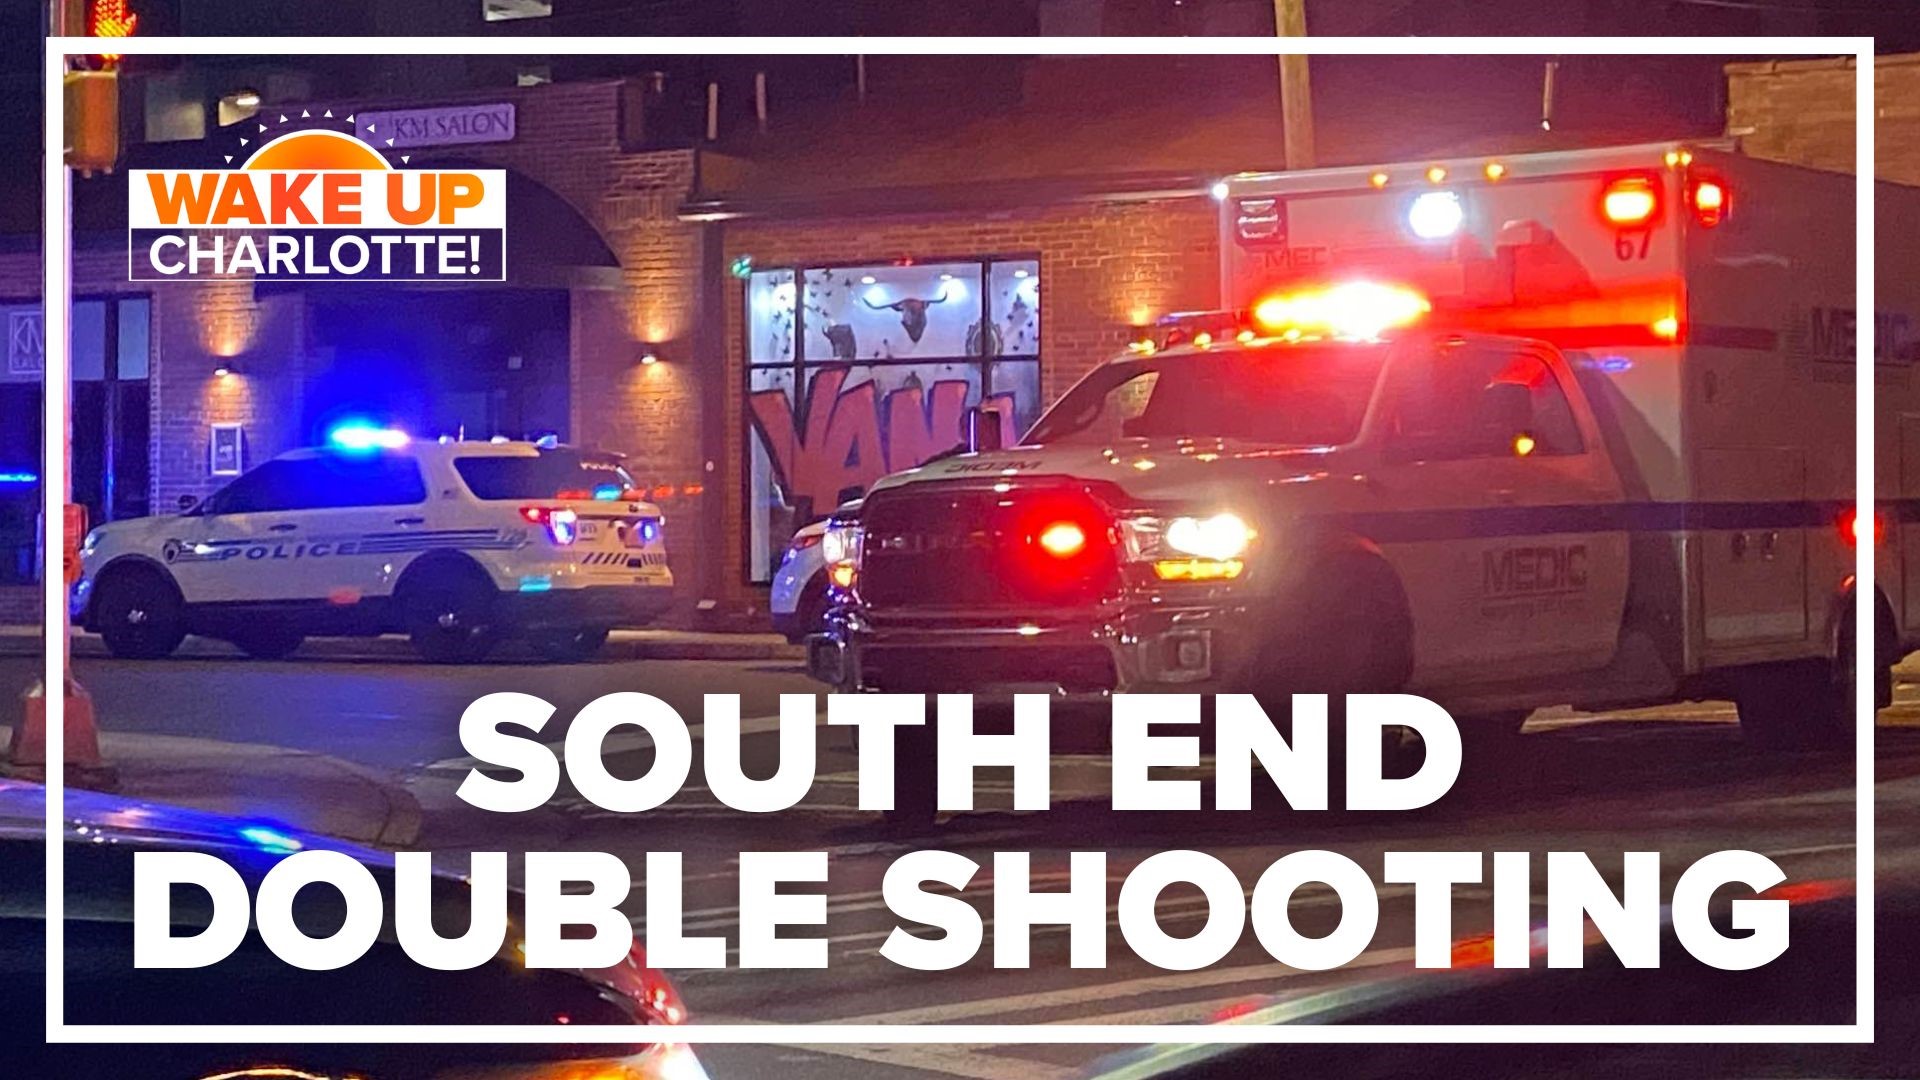 Two people were killed in a shooting outside a popular brewery in Charlotte's South End late Monday night, police said.